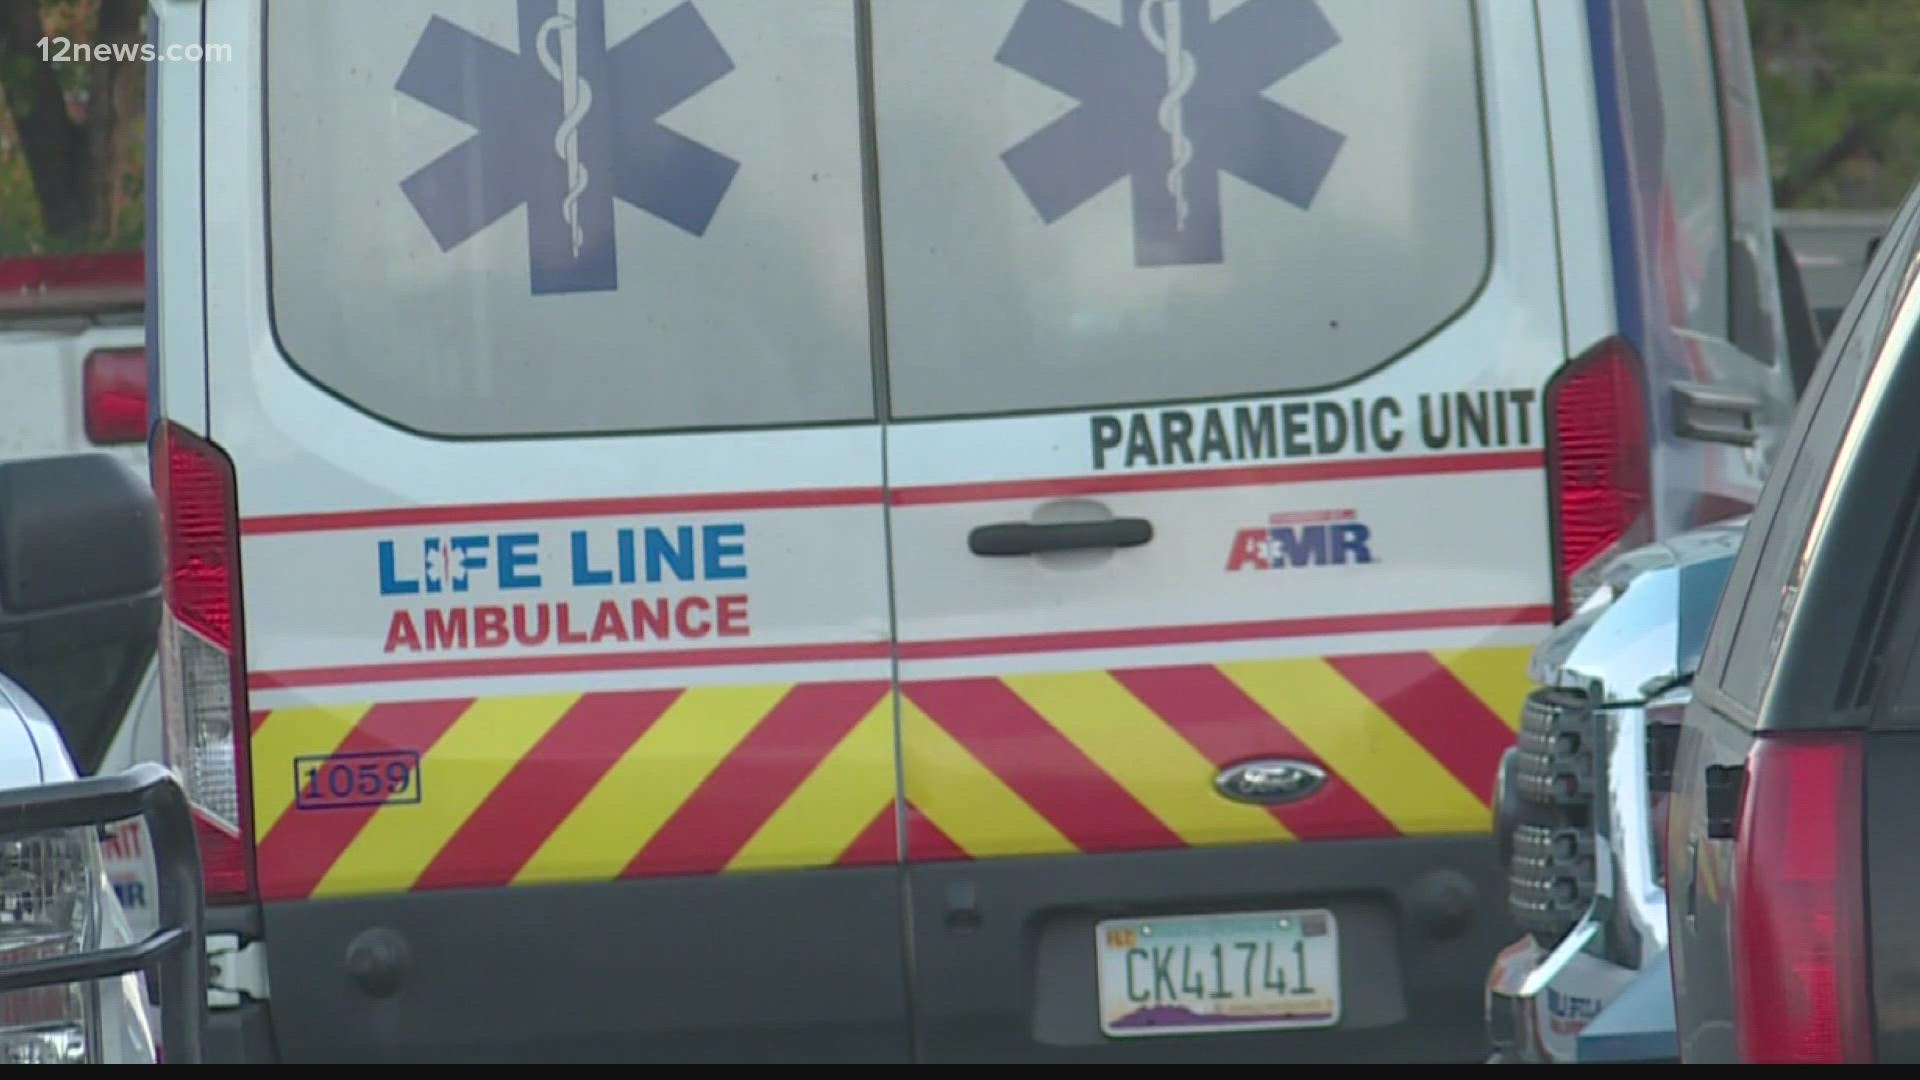 A reform bill will be introduced this year to ask legislators for more oversight into how ambulances are authorized and regulated, making for more availability.